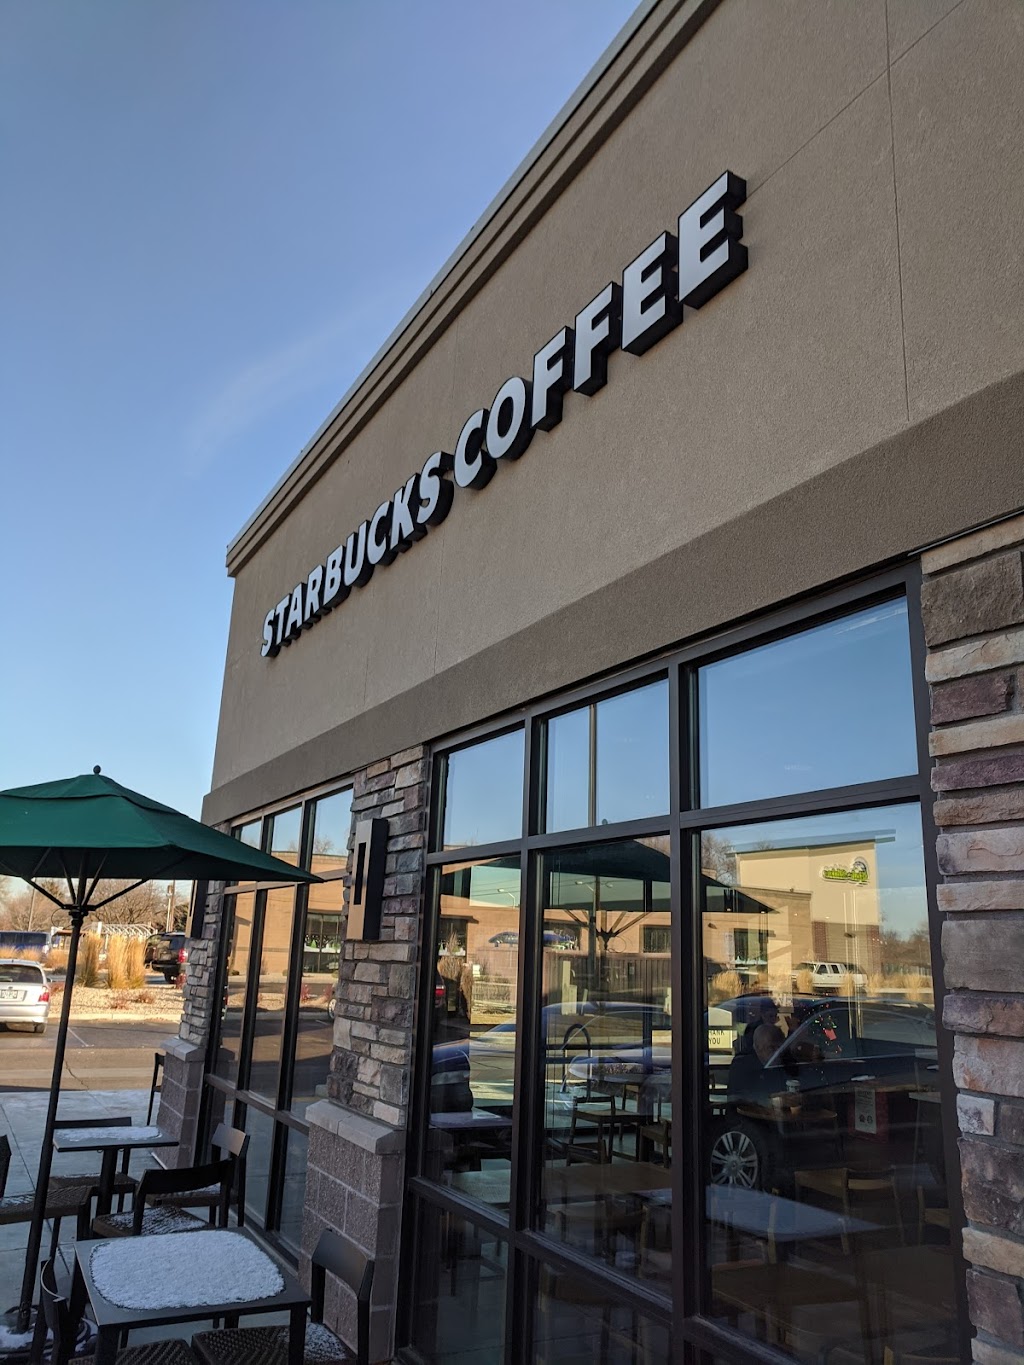 Starbucks | cafe | 1324 12th Ave Rd, Nampa, ID 83686, USA | 2084427256 OR +1 208-442-7256